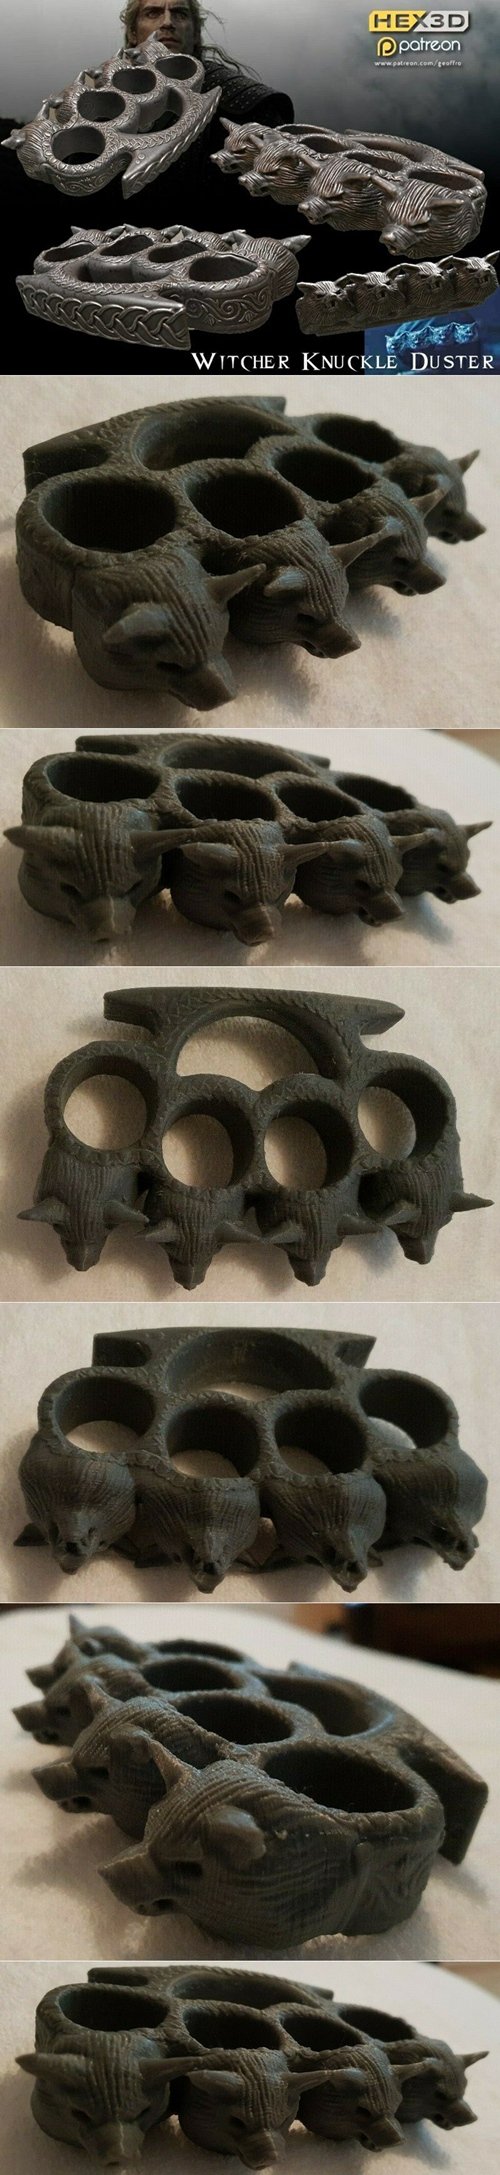 The Witcher Knuckle Duster 3D Print